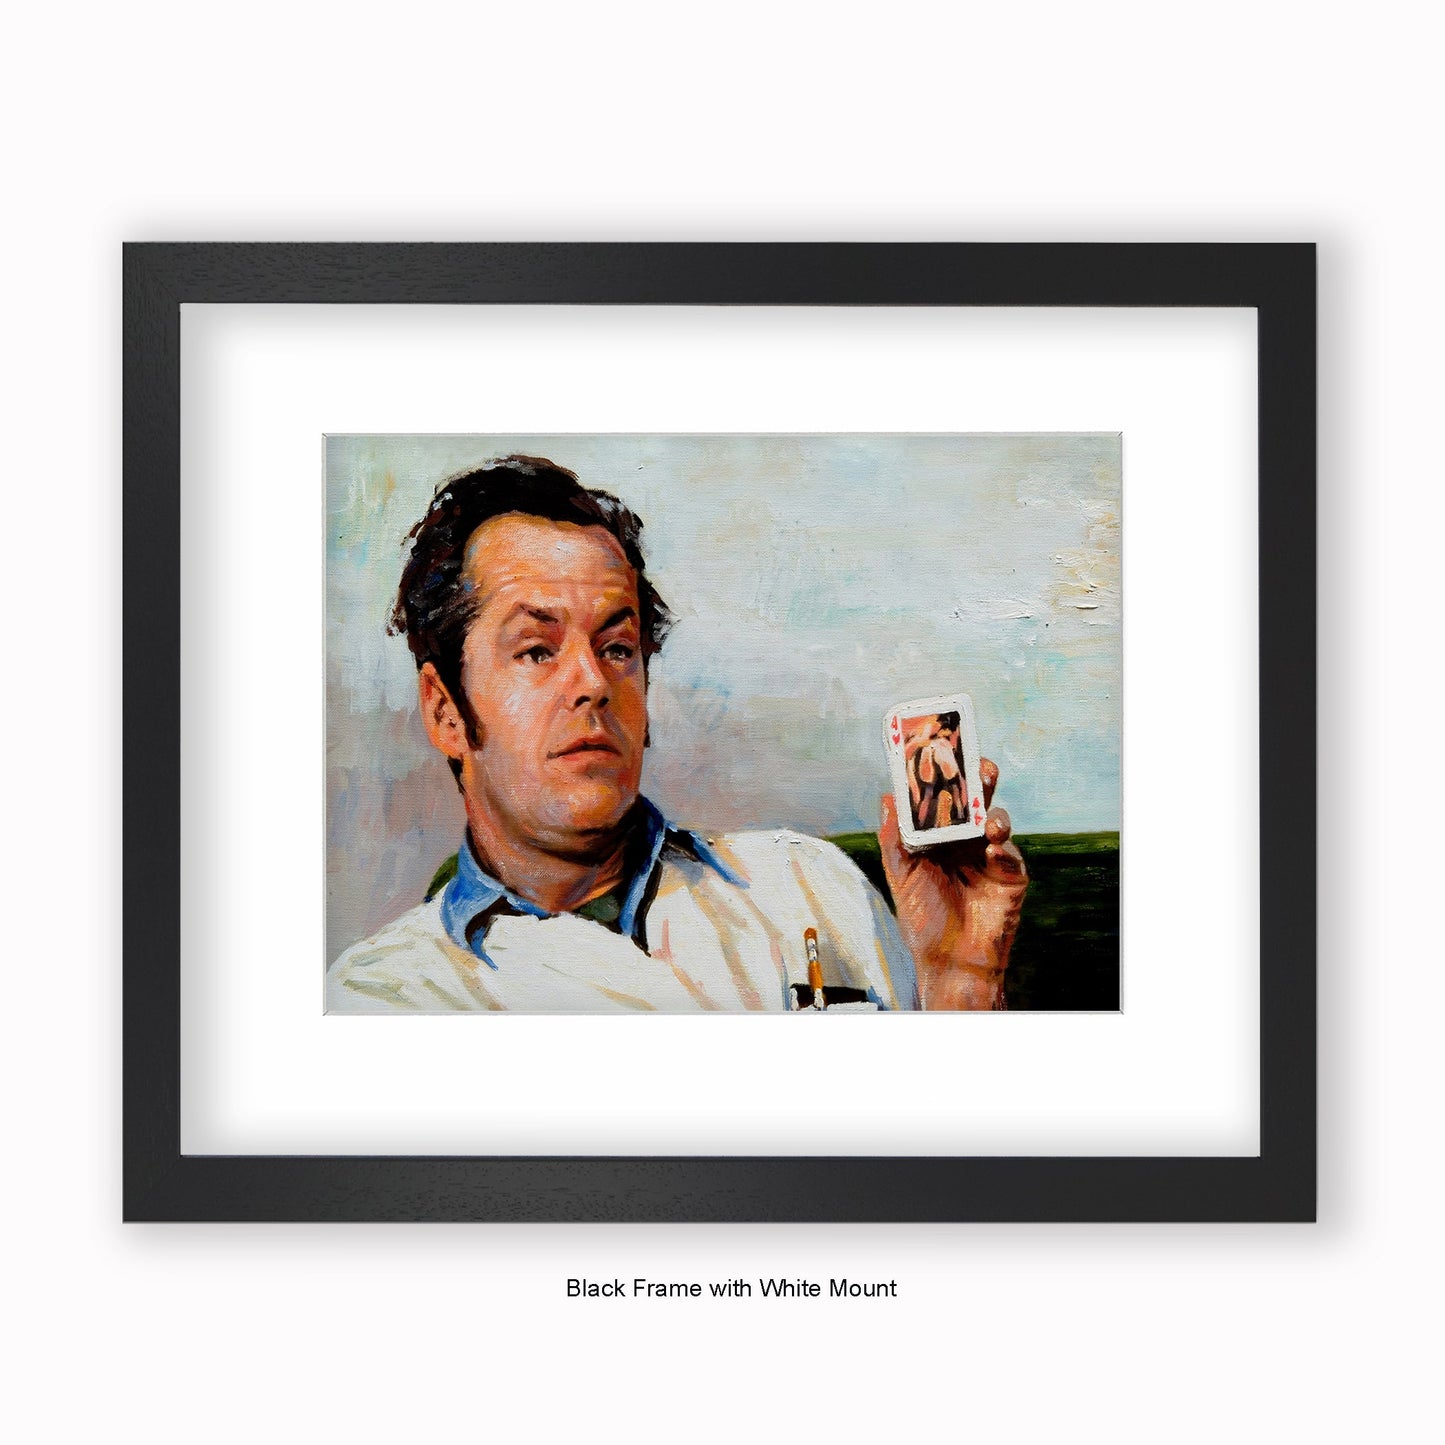 One Flew Over the Cuckoo's Nest - Jack Nicholson - Mounted & Framed Art Print